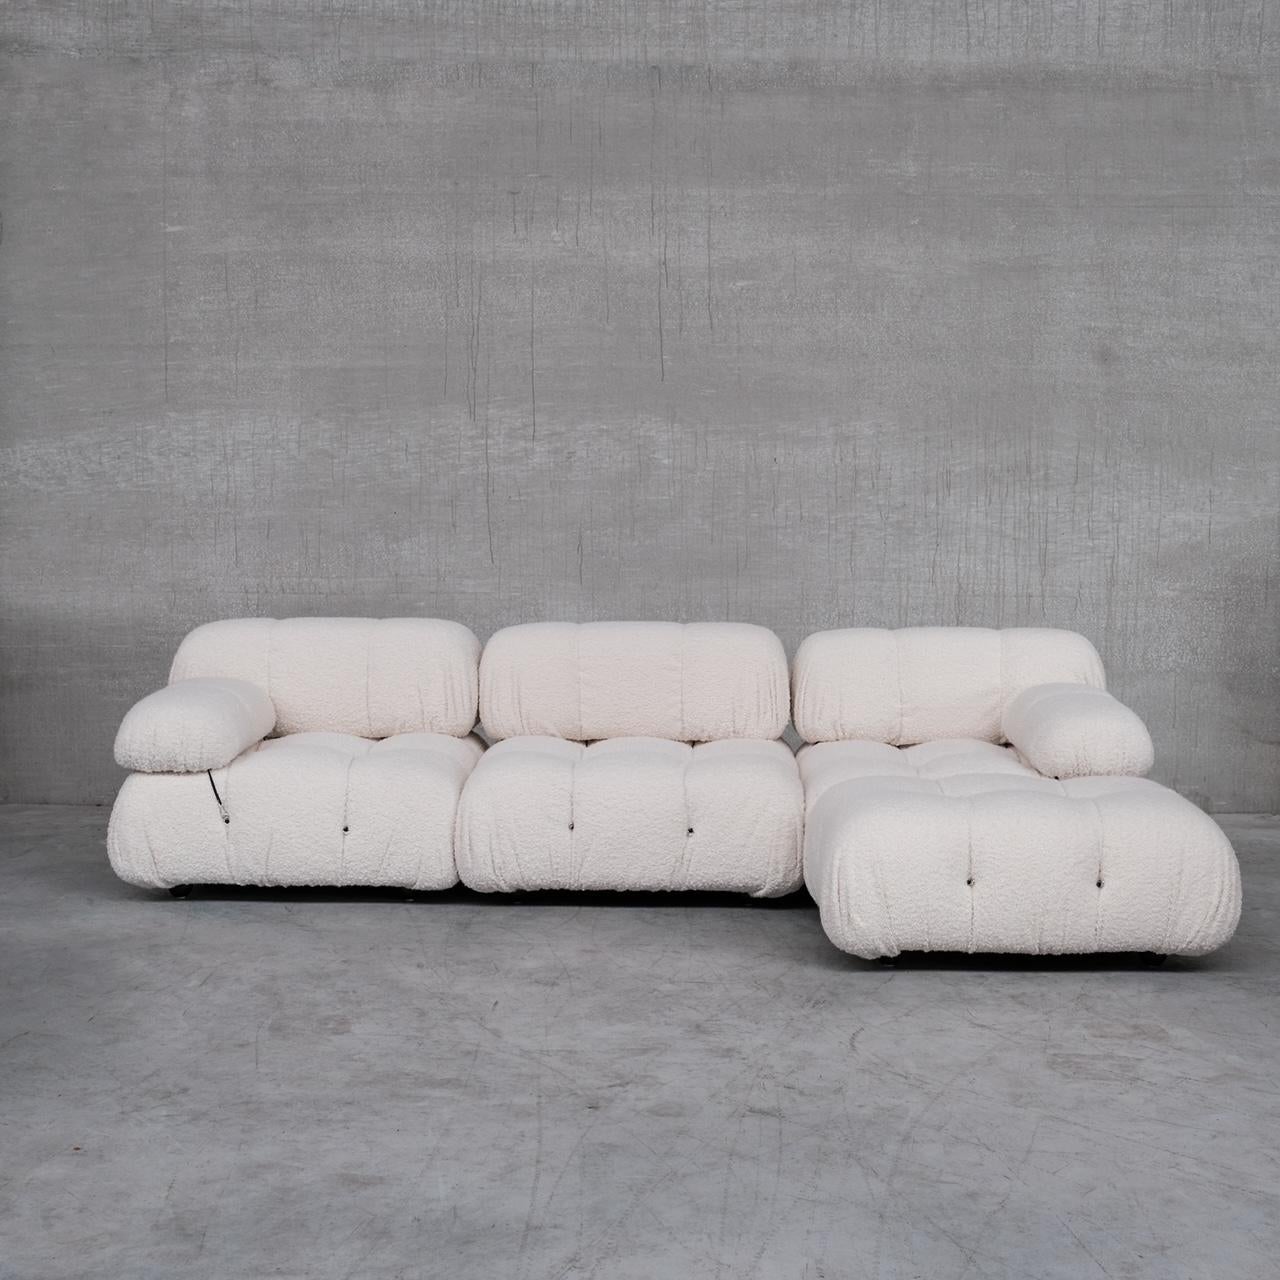 A four piece modular sofa by Mario Bellini. 

Italy, c1980s. 

The much sought after 'Camaleonda' model. 

Original B&B Italia, not a later 21st century production. 

This model is a late production which has since been upholstered in off-white